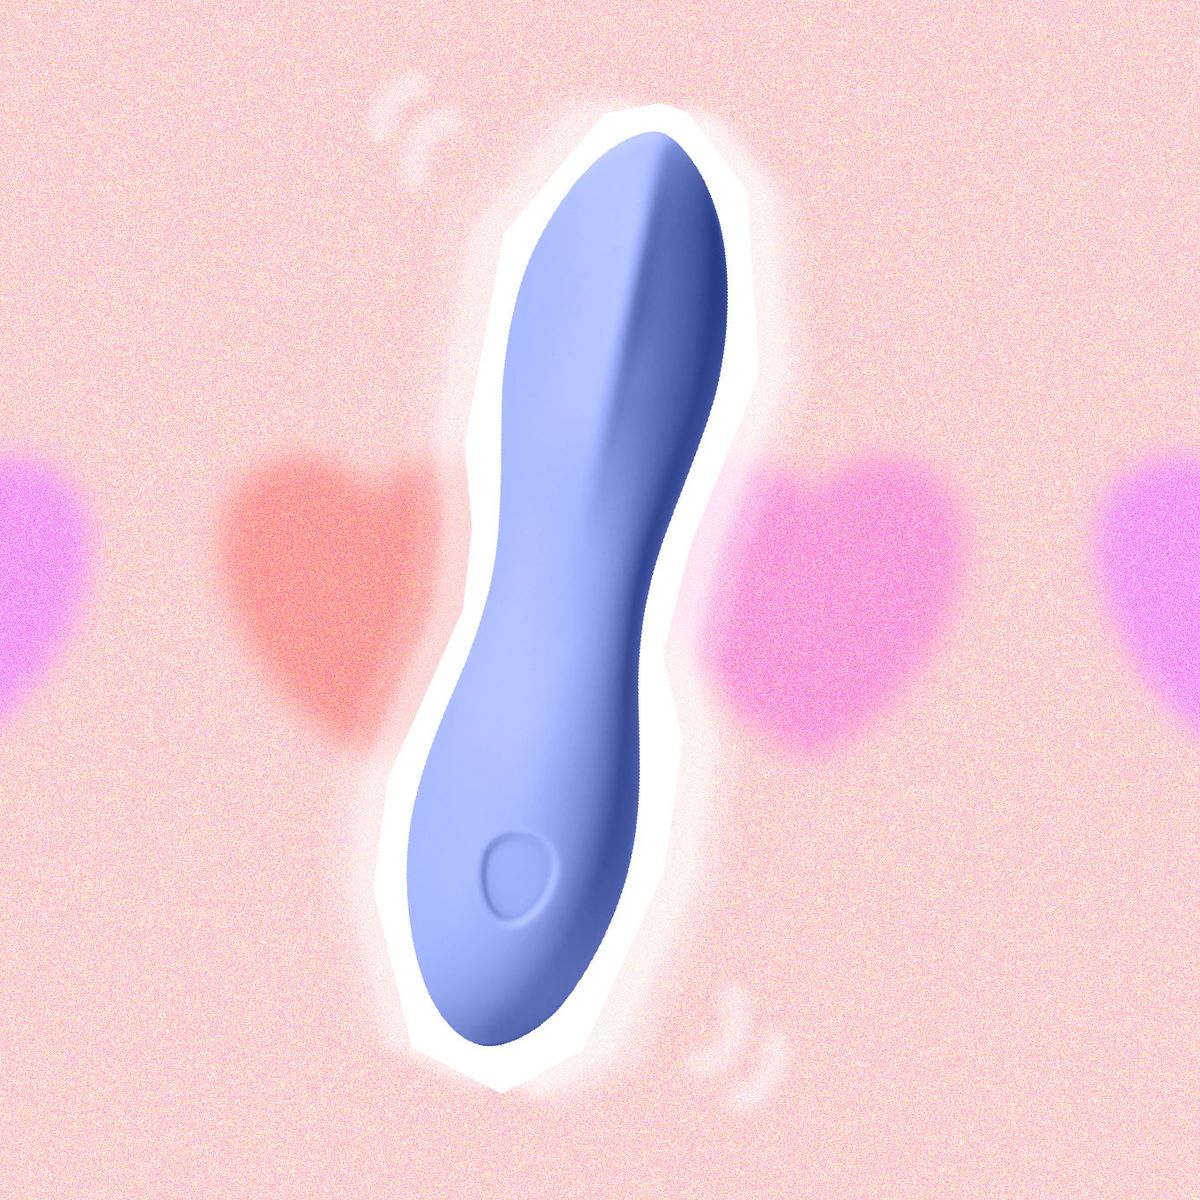 Experts Recommend Vibrators for Sexual Health at All Ages